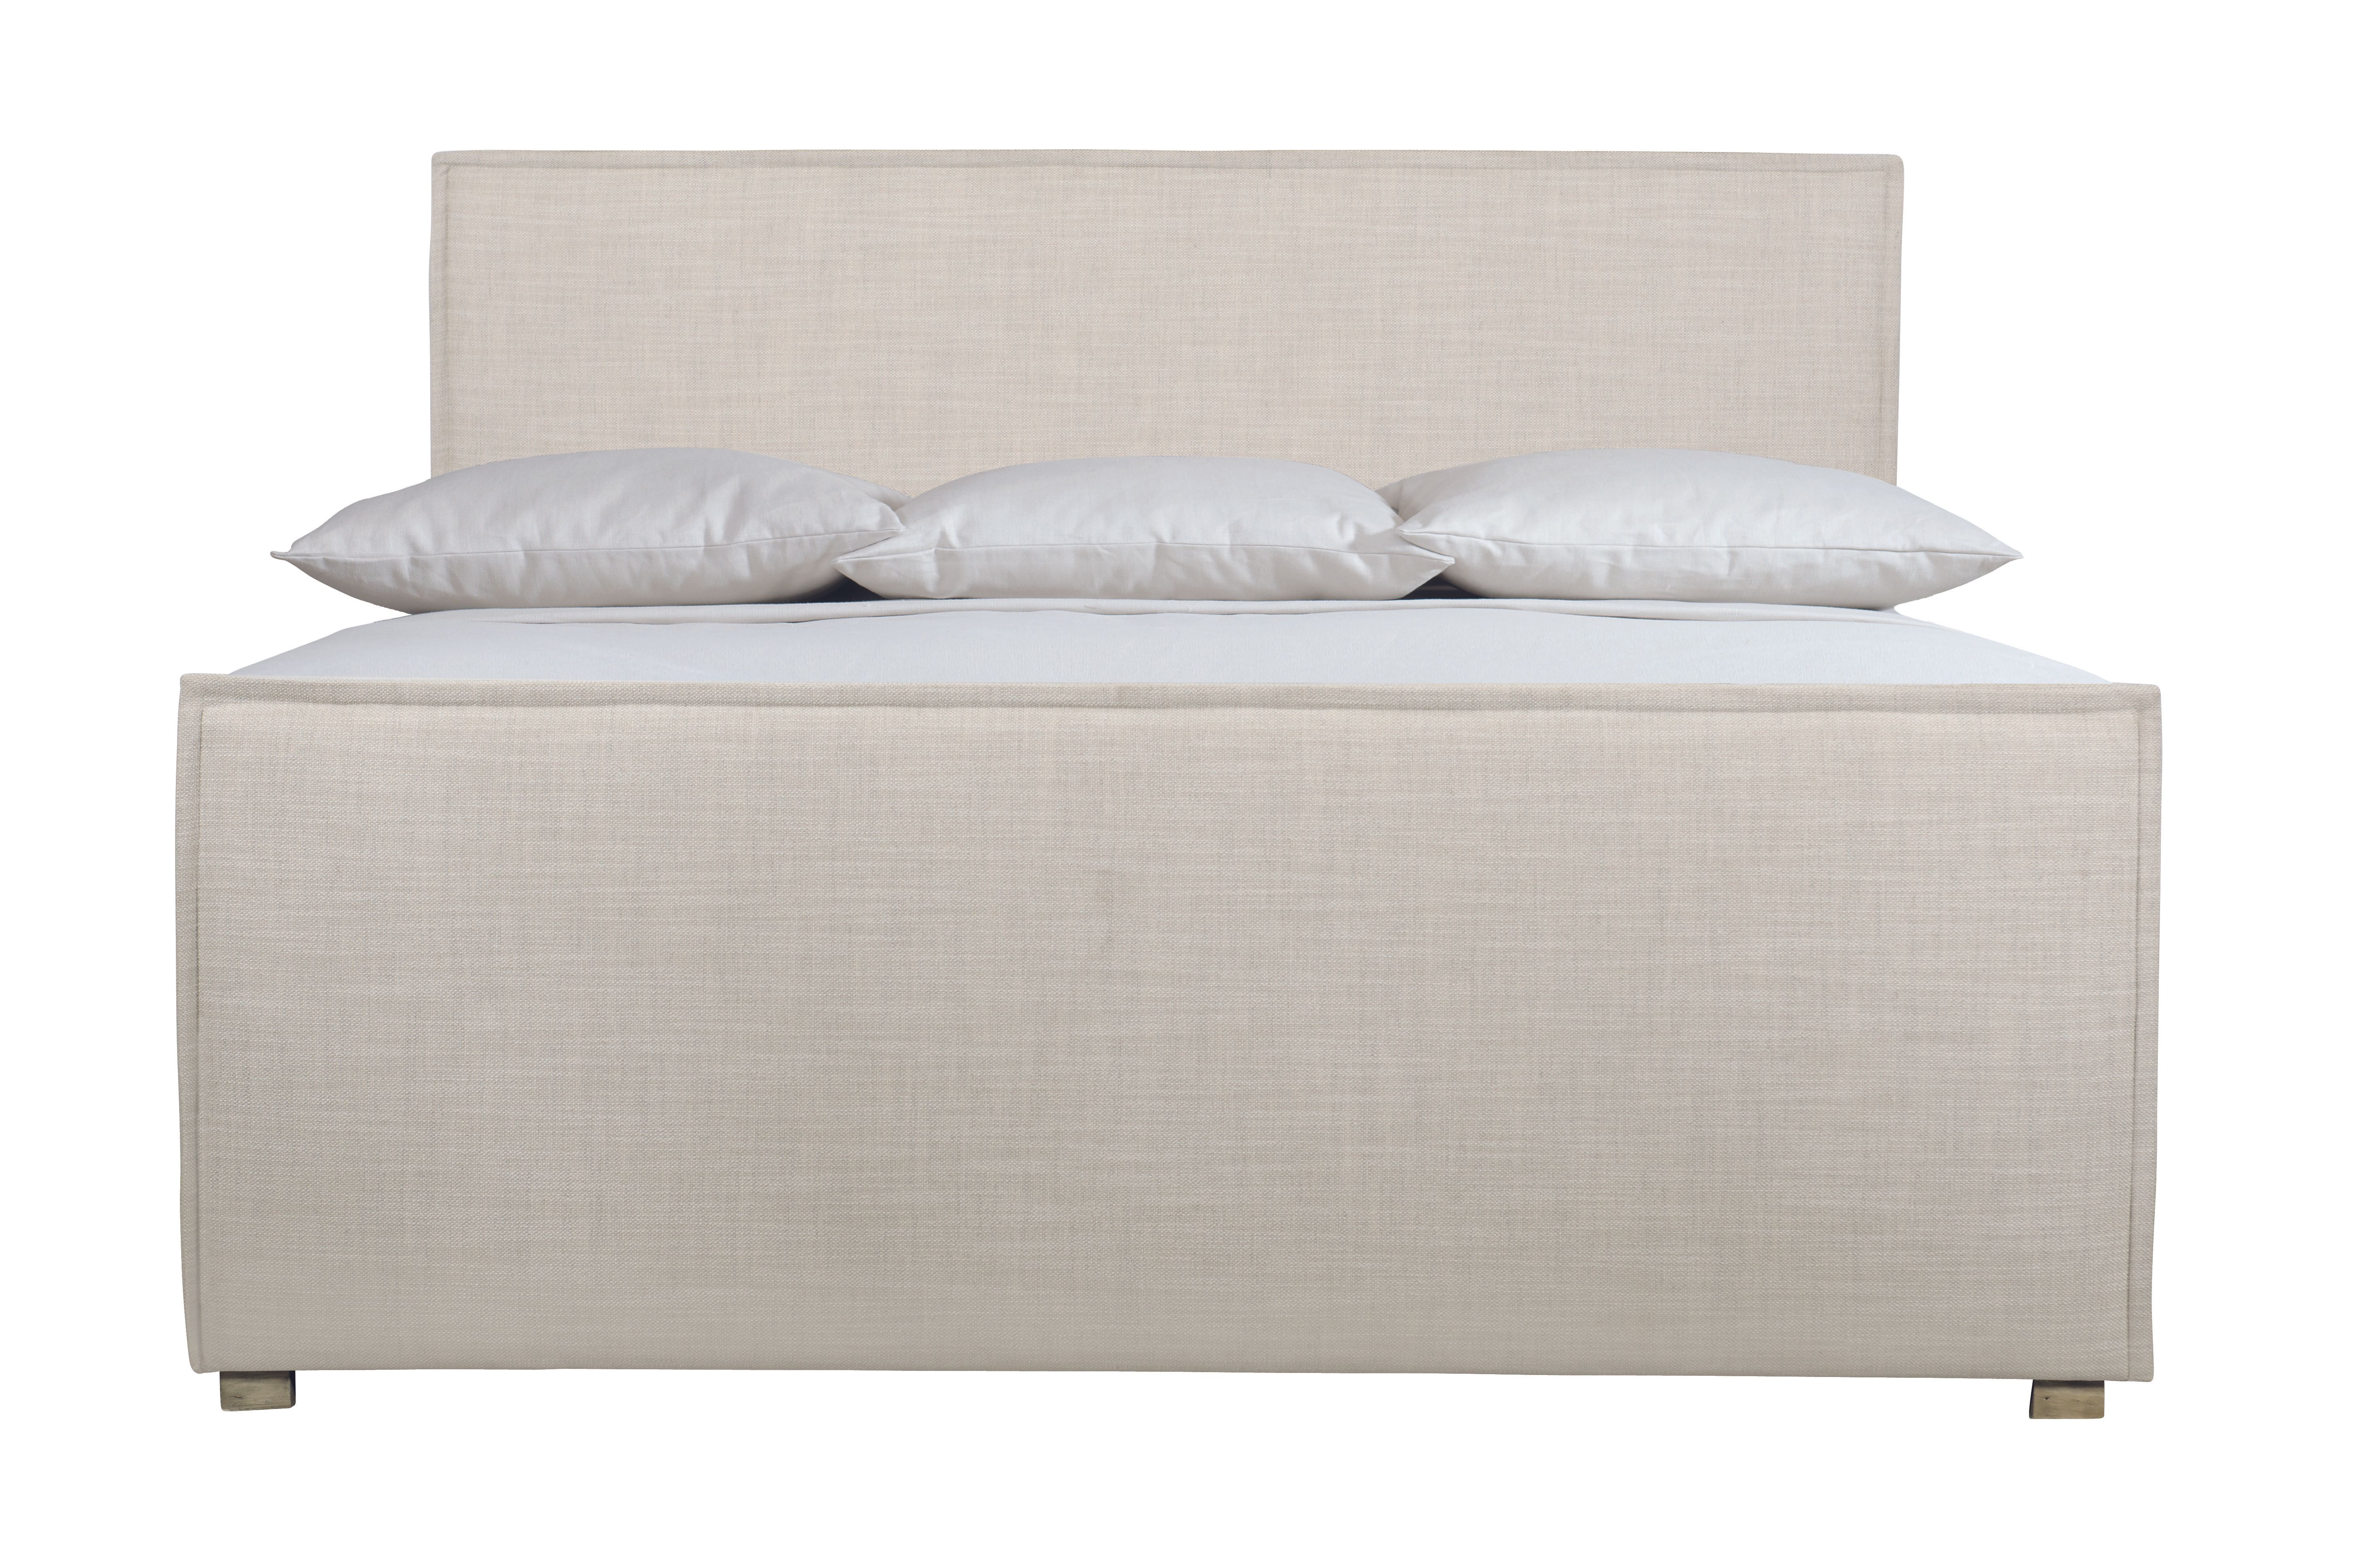 Loft Sawyer Upholstered Bed | Scout & Nimble